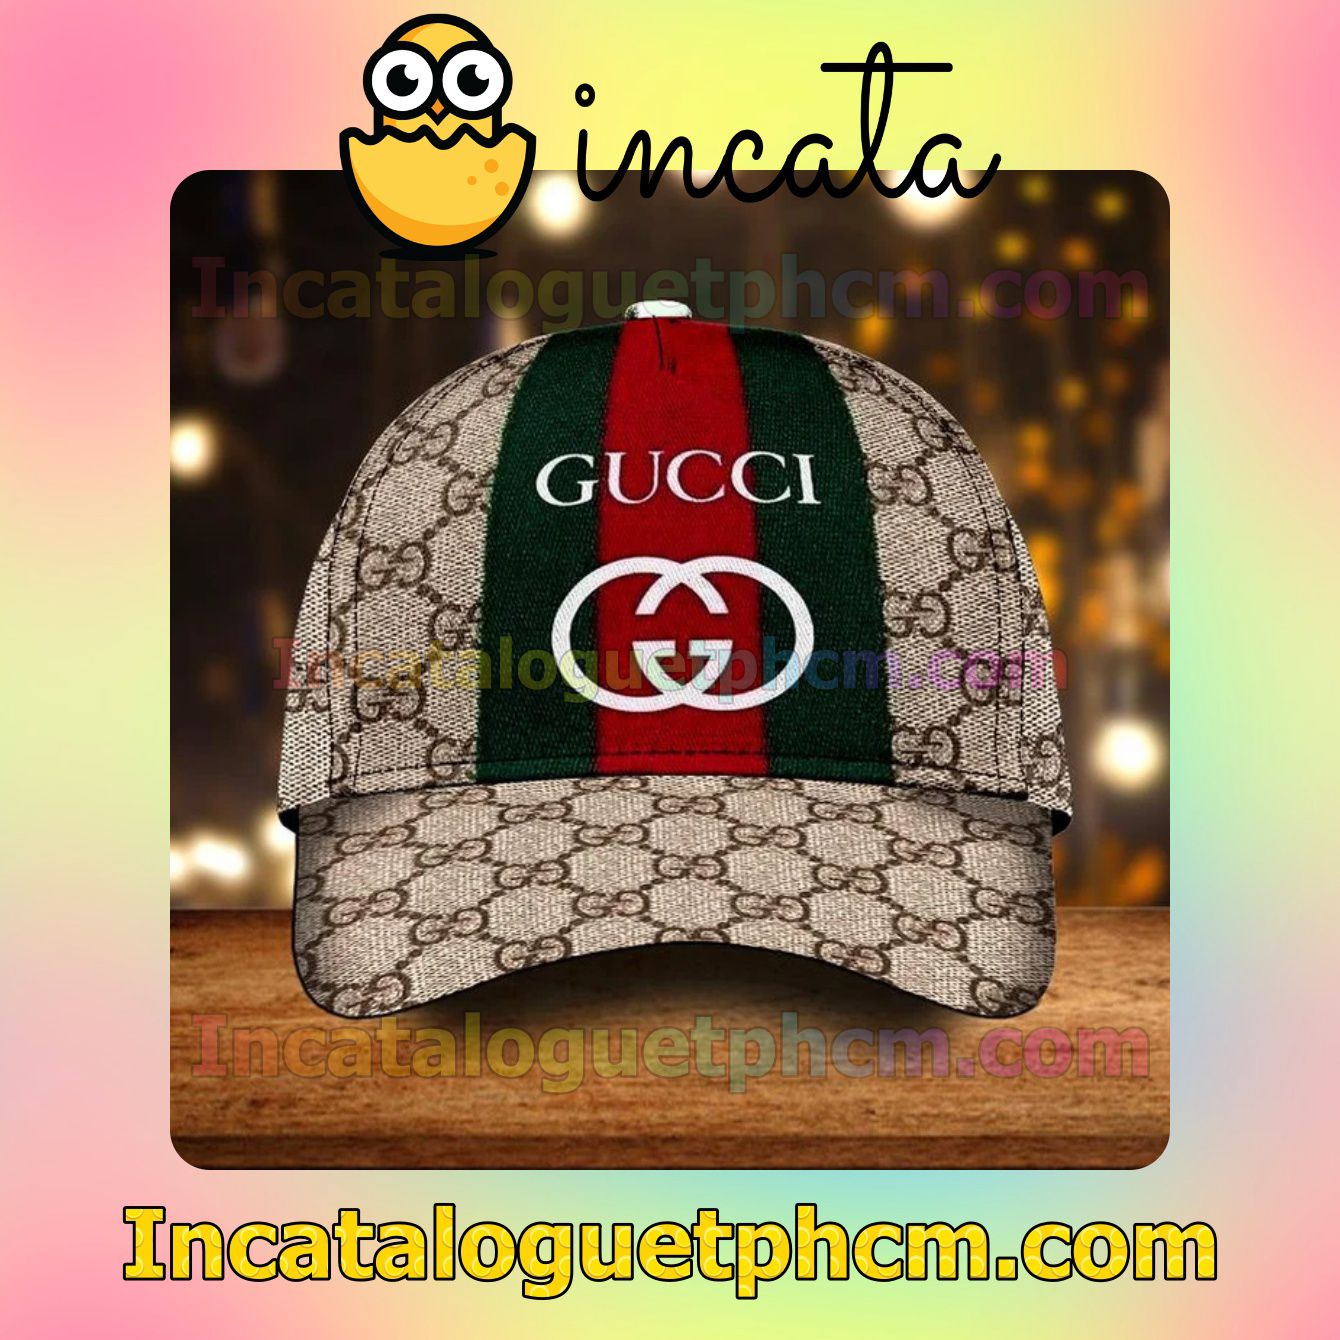 Order Gucci Beige With Brand Name And Logo On Green And Red Stripes Classic Hat Caps Gift For Men